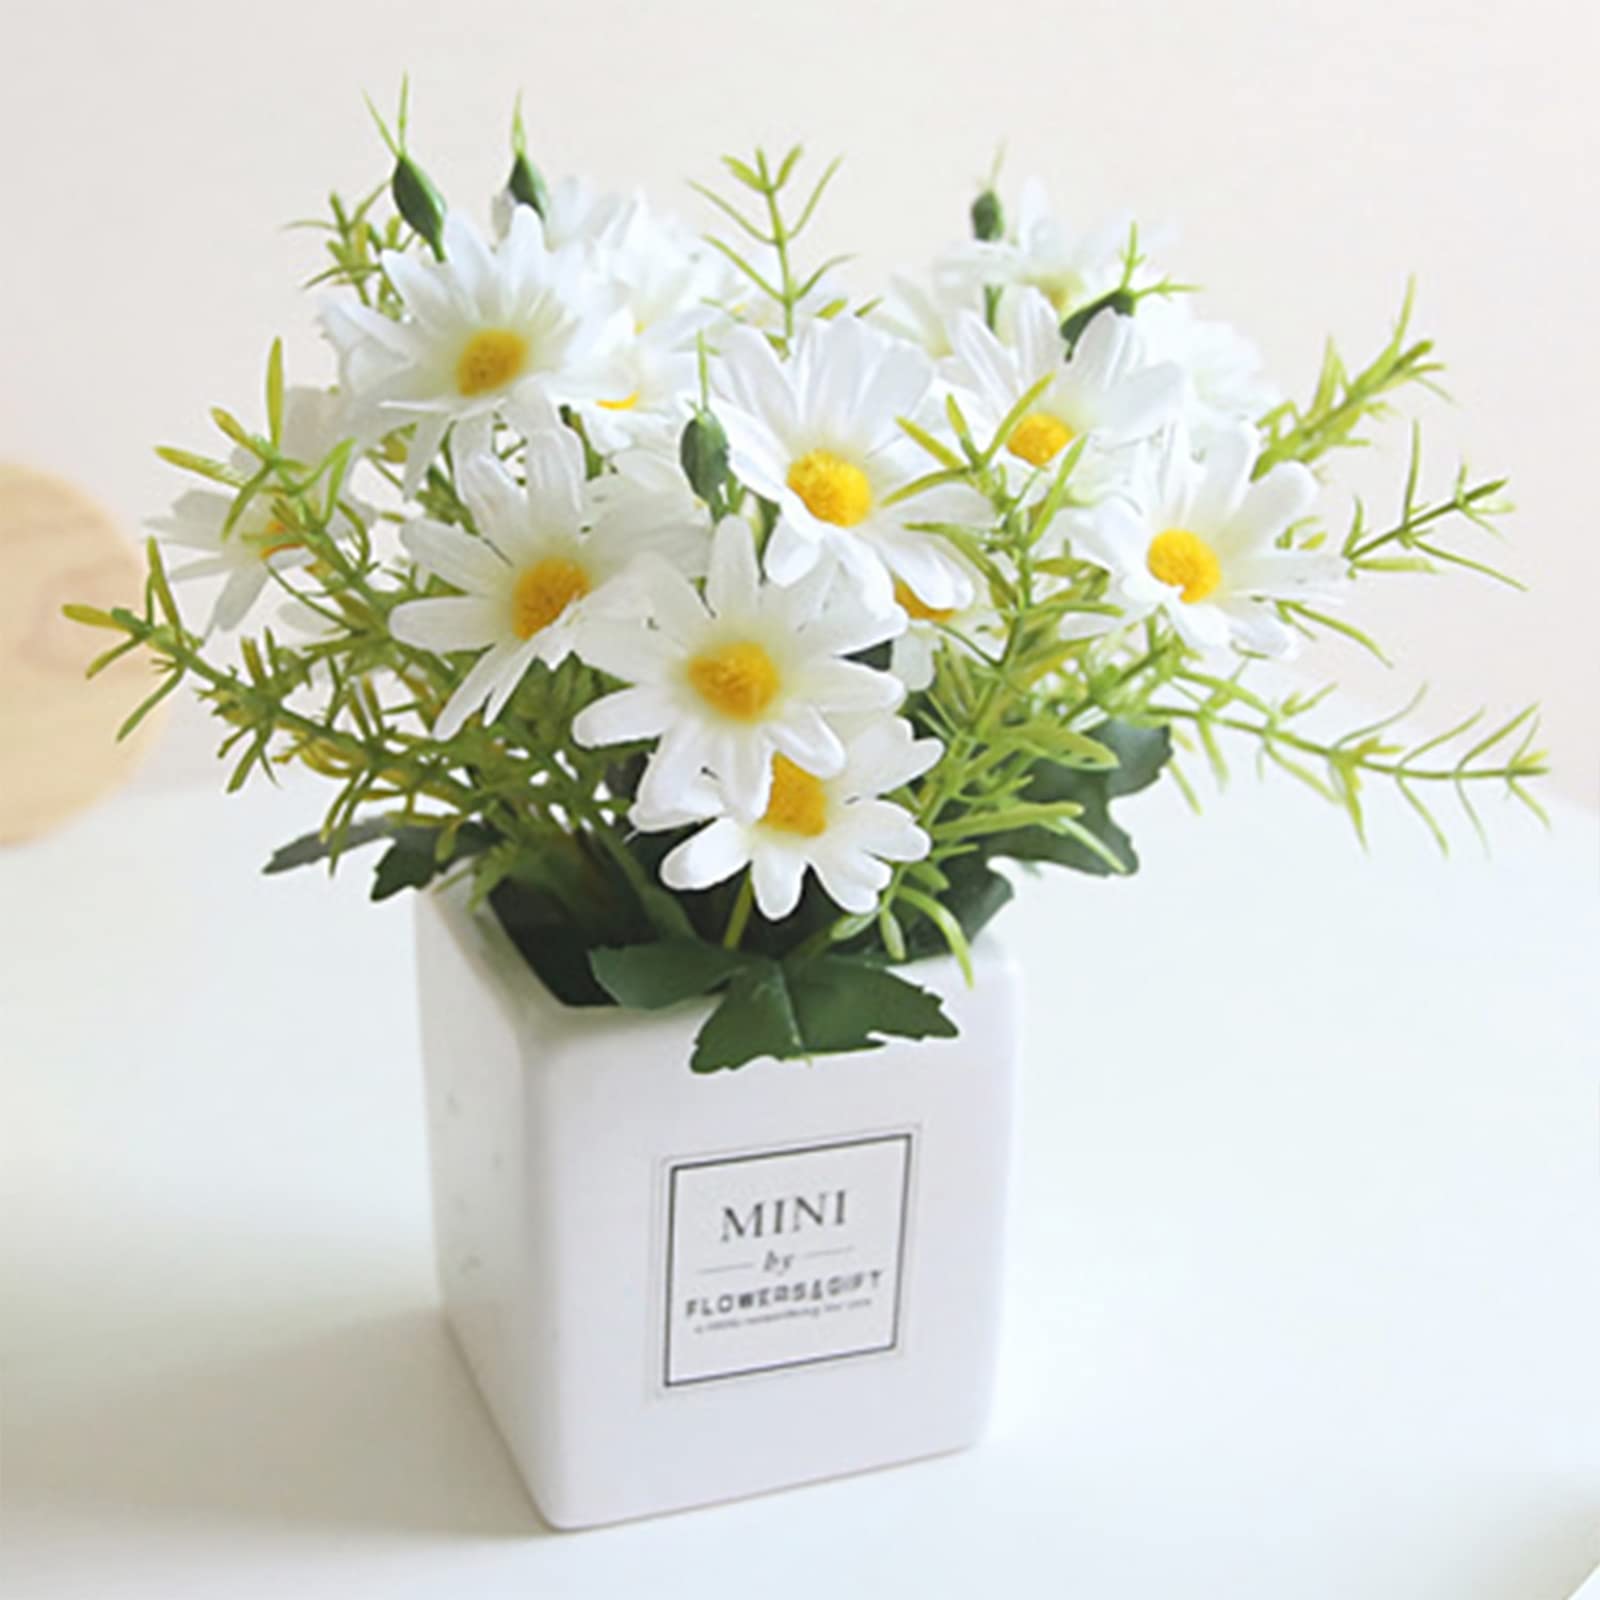 artificial daisy flowers, decor the house with elegance of daisies.